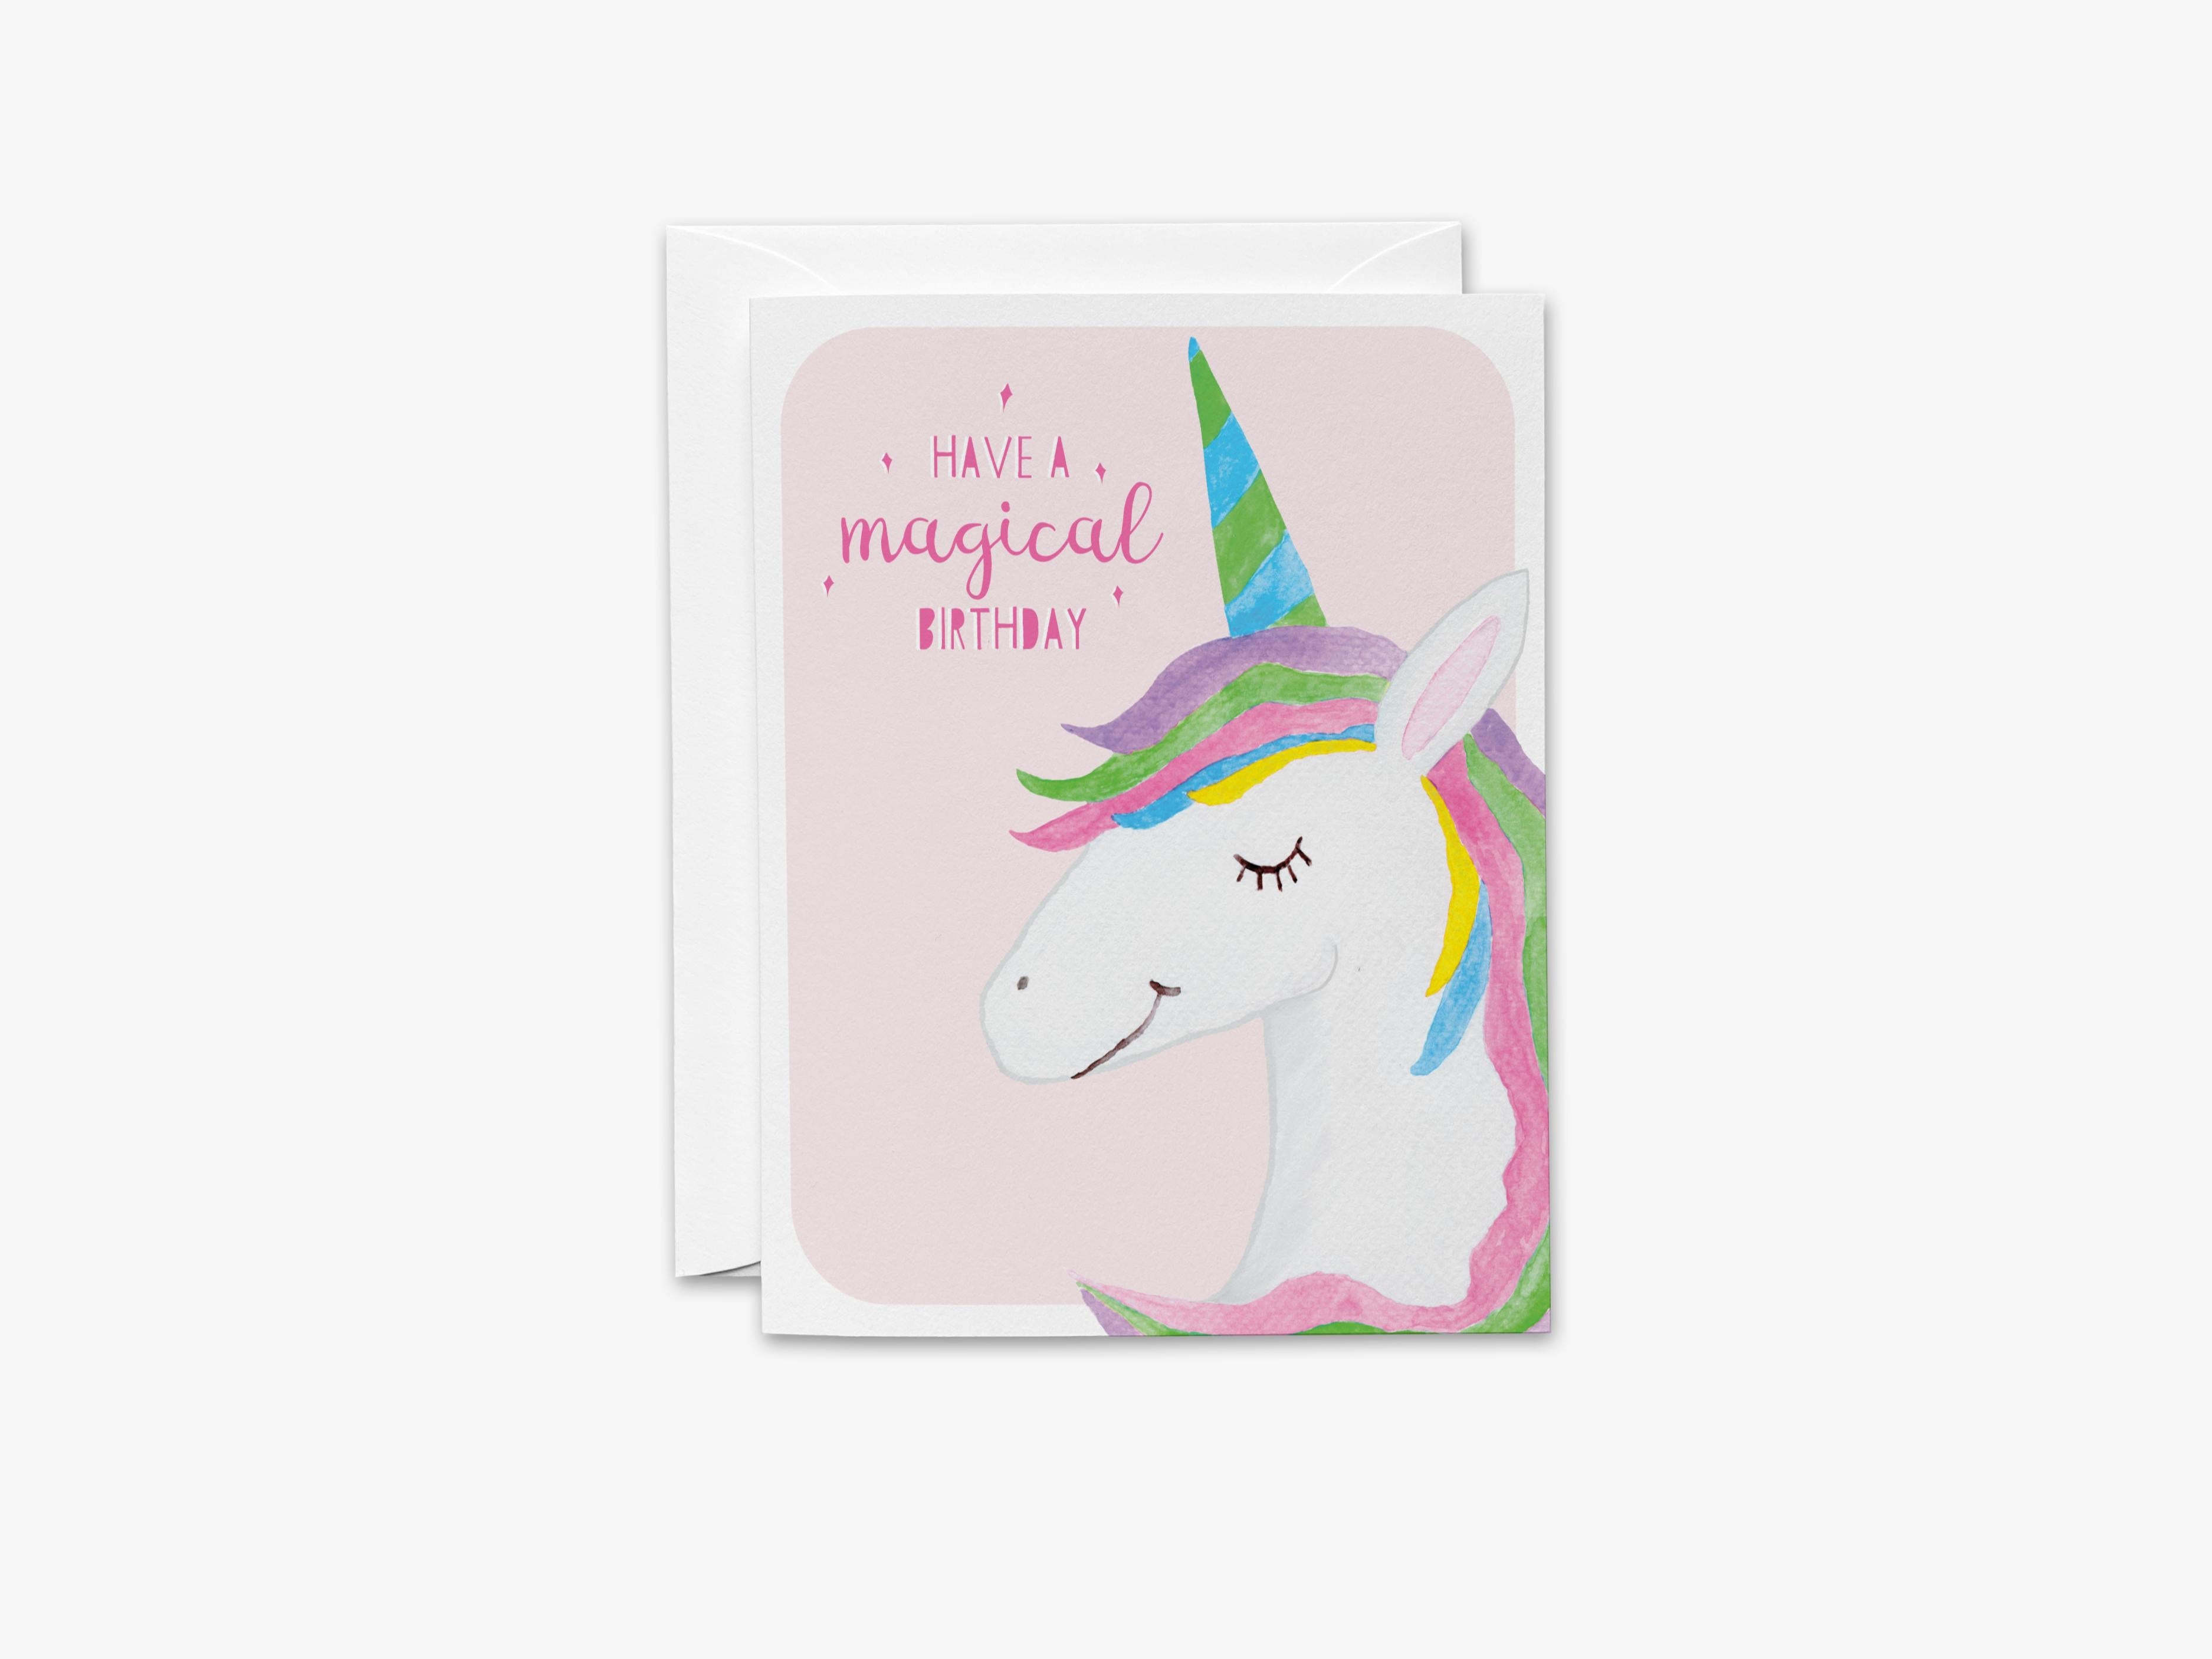 Unicorn Birthday Card-These folded birthday cards are 4.25x5.5 and feature our hand-painted unicorn, printed in the USA on 100lb textured stock. They come with a White envelope and make a great card for a magical birthday.-The Singing Little Bird